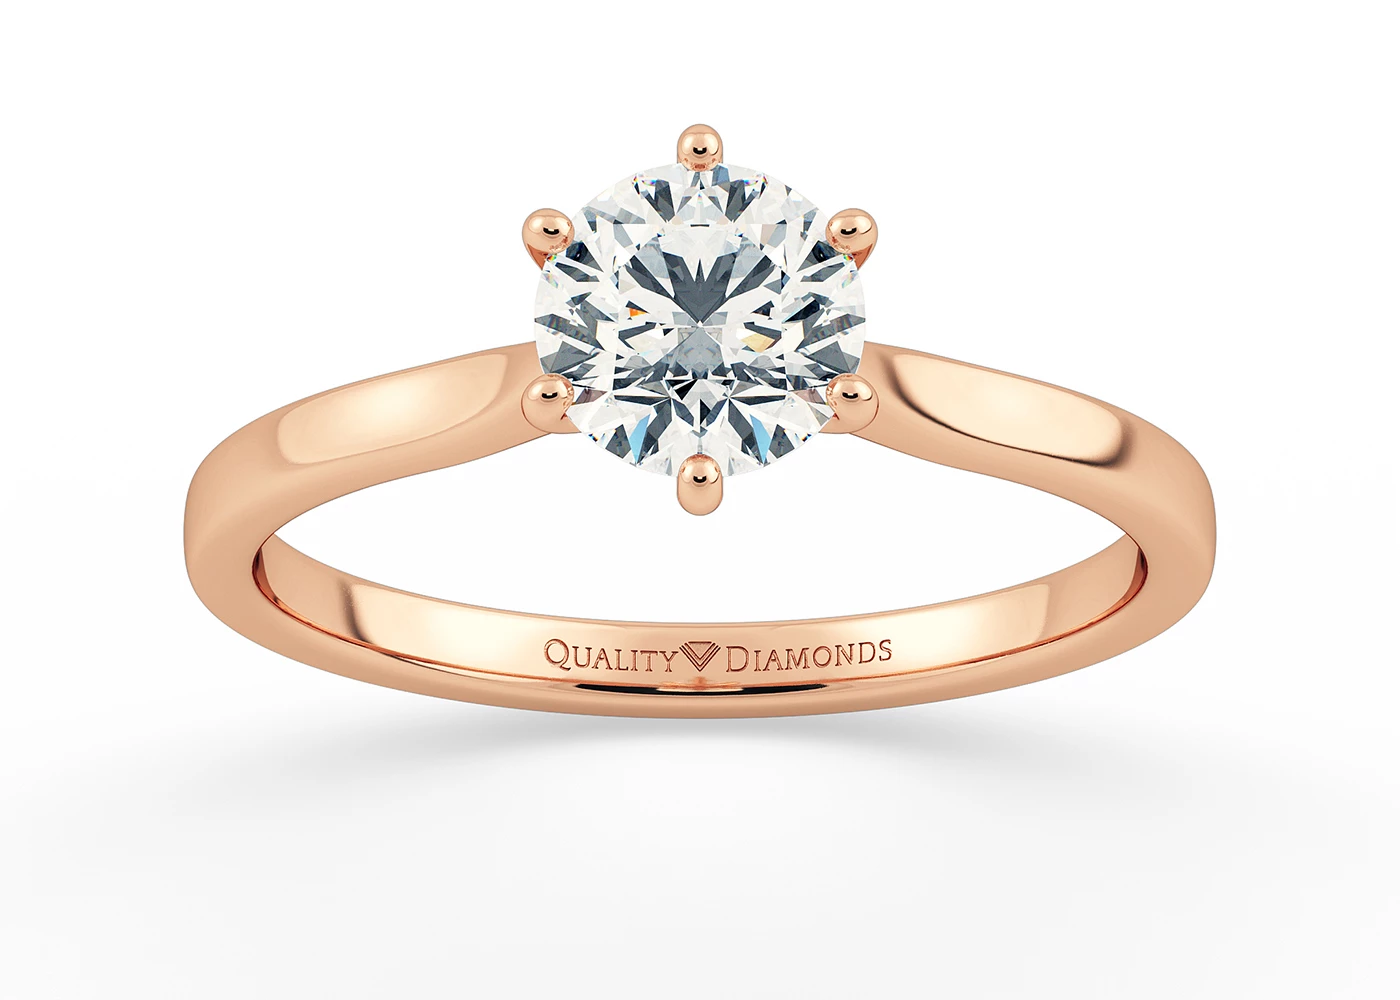 Six Claw Round Brilliant Beau Diamond Ring in 9K Rose Gold